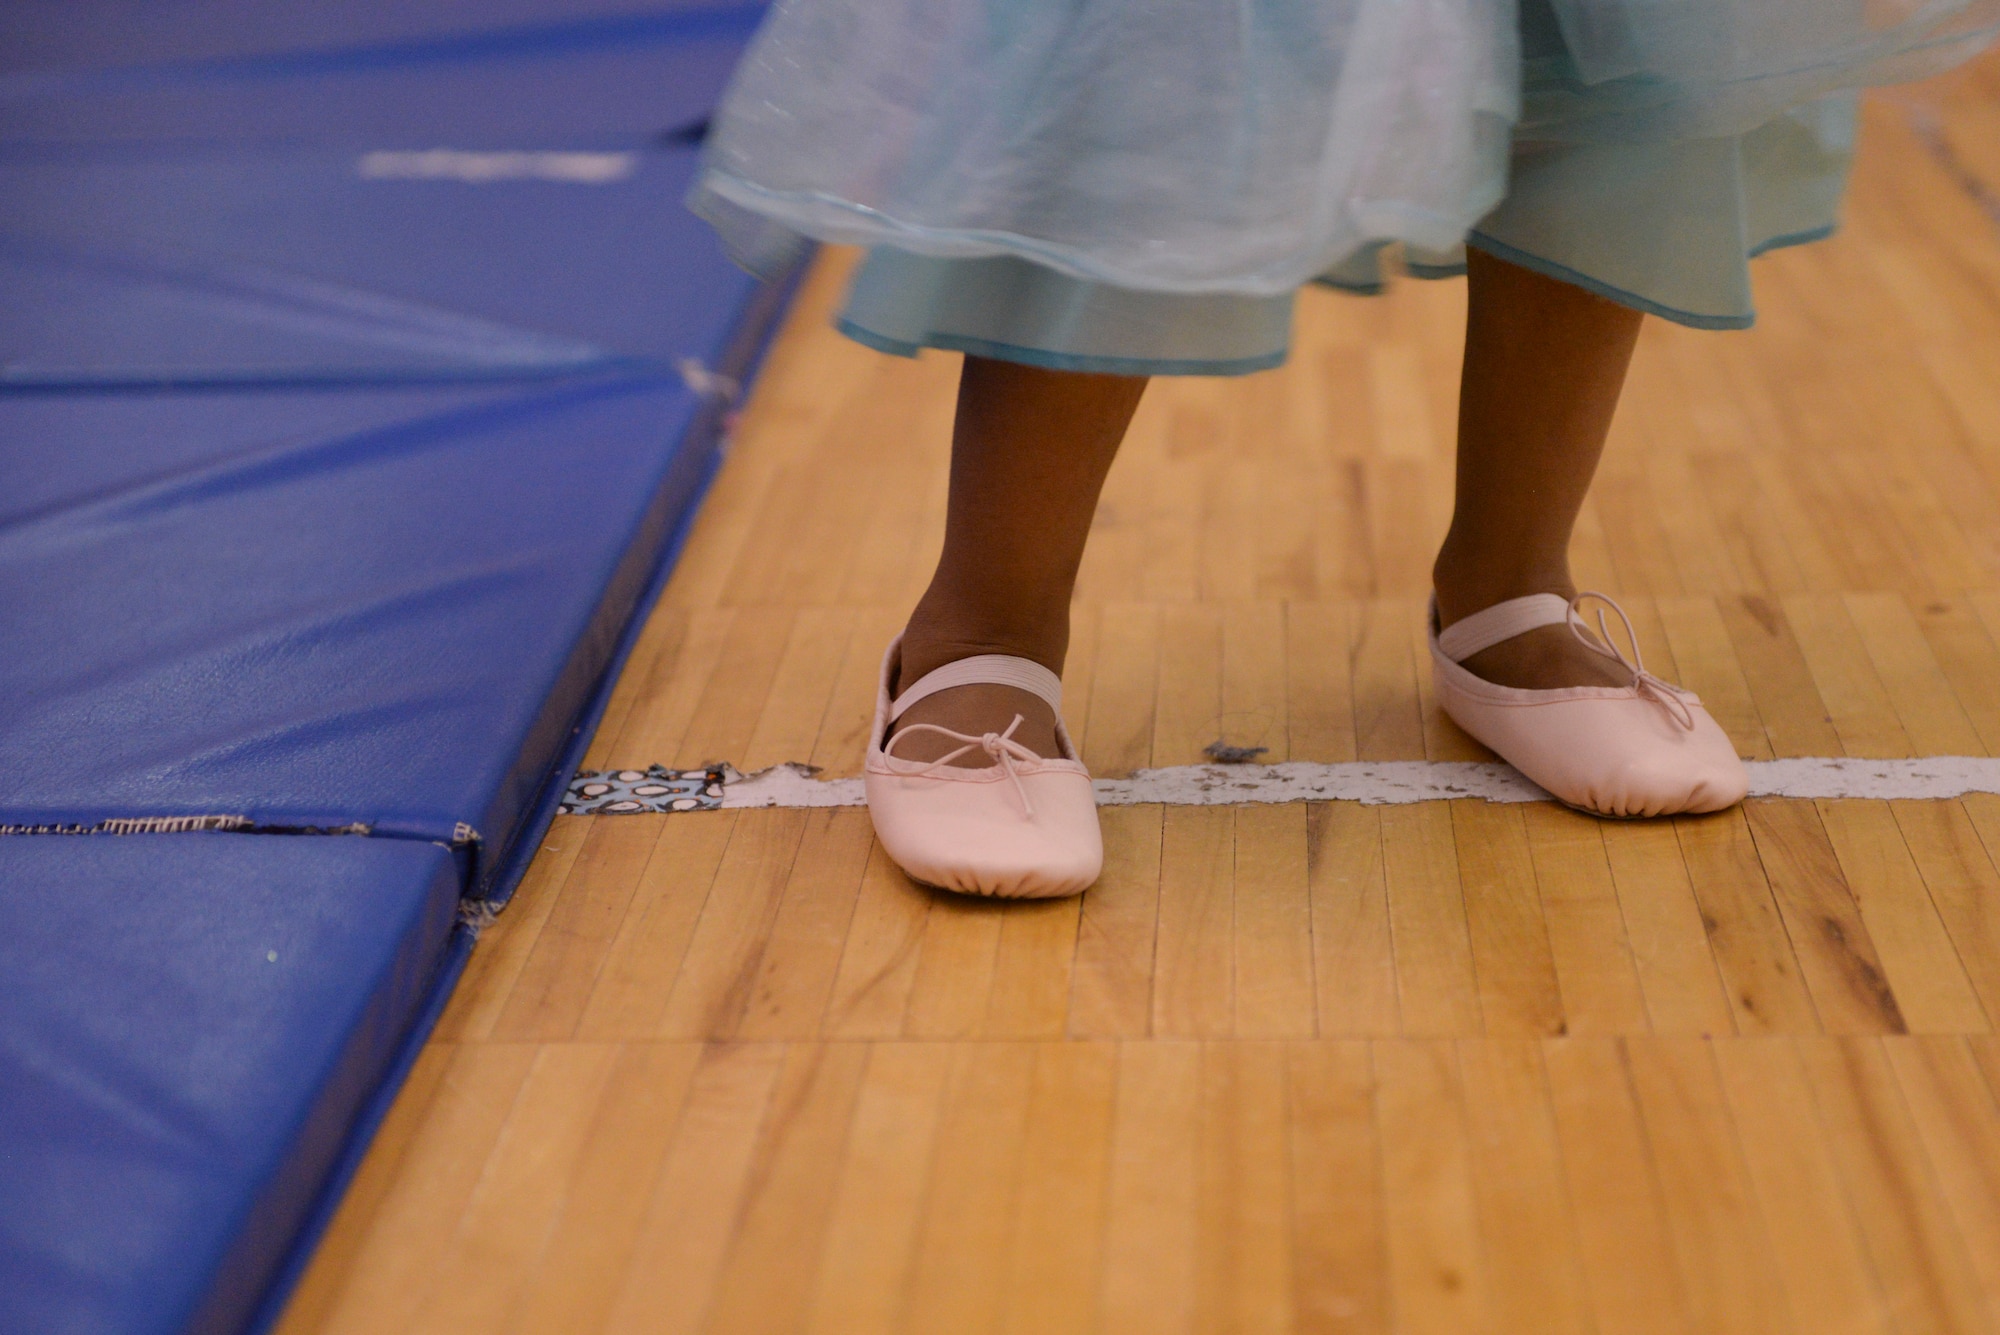 A young girl from the Youth Center at Minot Air Force Base, N.D., stands during Princess Dance Camp, June 29, 2016. Students were taught basic instructions for ballet, such as positions, pirouettes and stretching. (U.S. Air Force photo/Airman 1st Class Jessica Weissman)